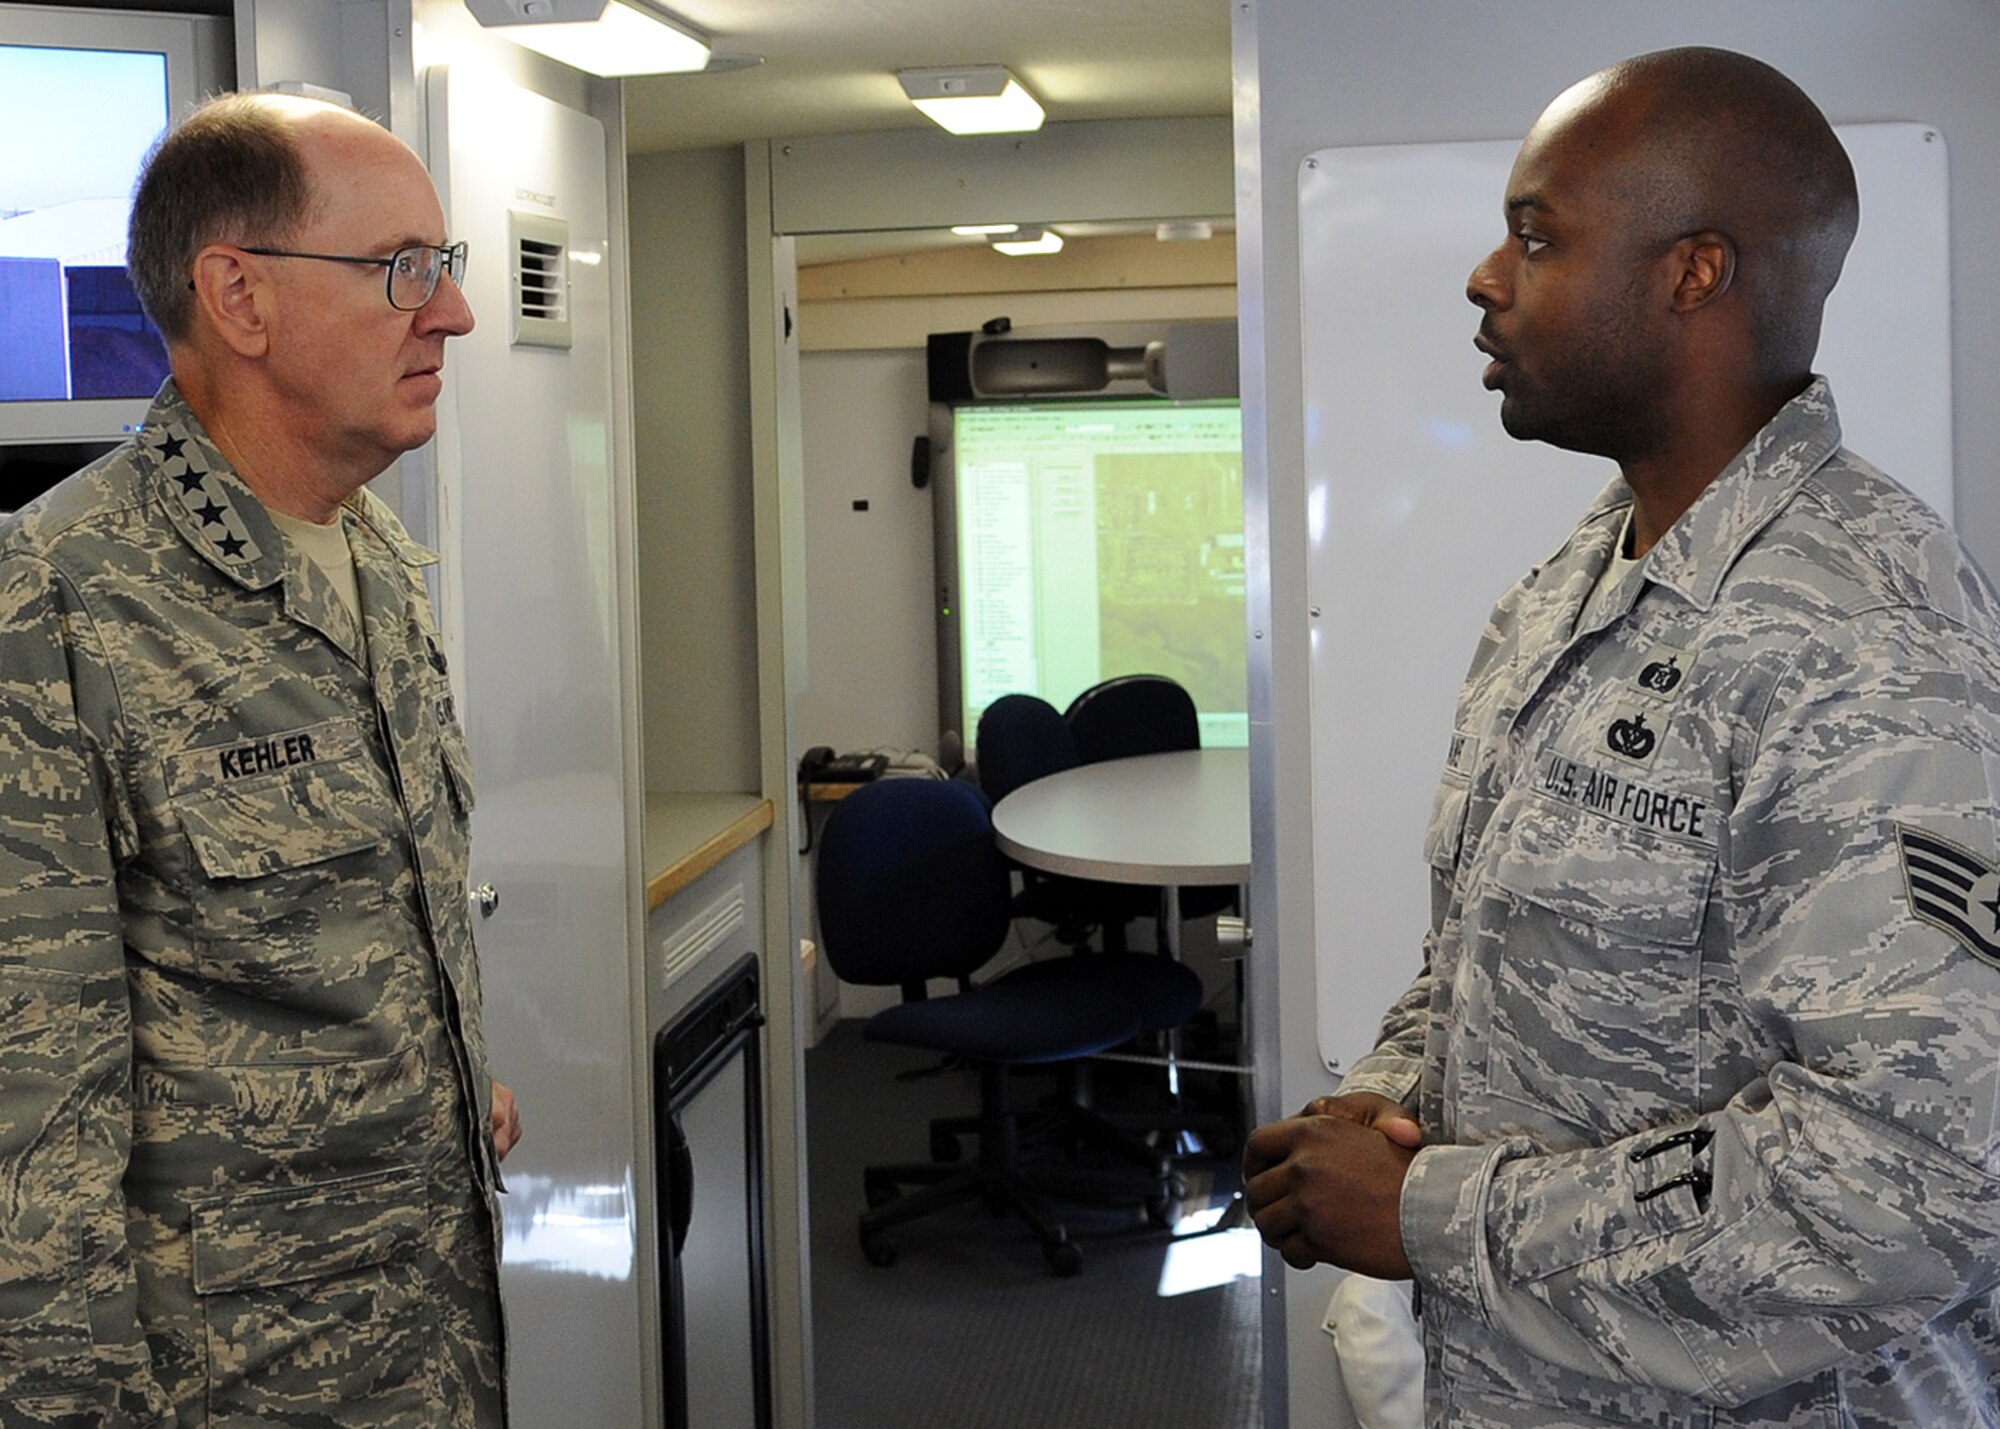 BUCKLEY AIR FORCE BASE, Colo. -- Staff Sgt. Othniel Evans, 460th Civil Engineer Squadron, informs Gen. C. Robert Kehler, Air Force Space Command commander, of the capabilities of the Mobile Emergency Operations Center during a tour of the vehicle. General Kehler spent Aug. 19 and 20 on the base visiting work centers for the first time since taking command of AFSPC in October 2007. (U.S. Air Force photo by Senior Airman Steven Czyz)